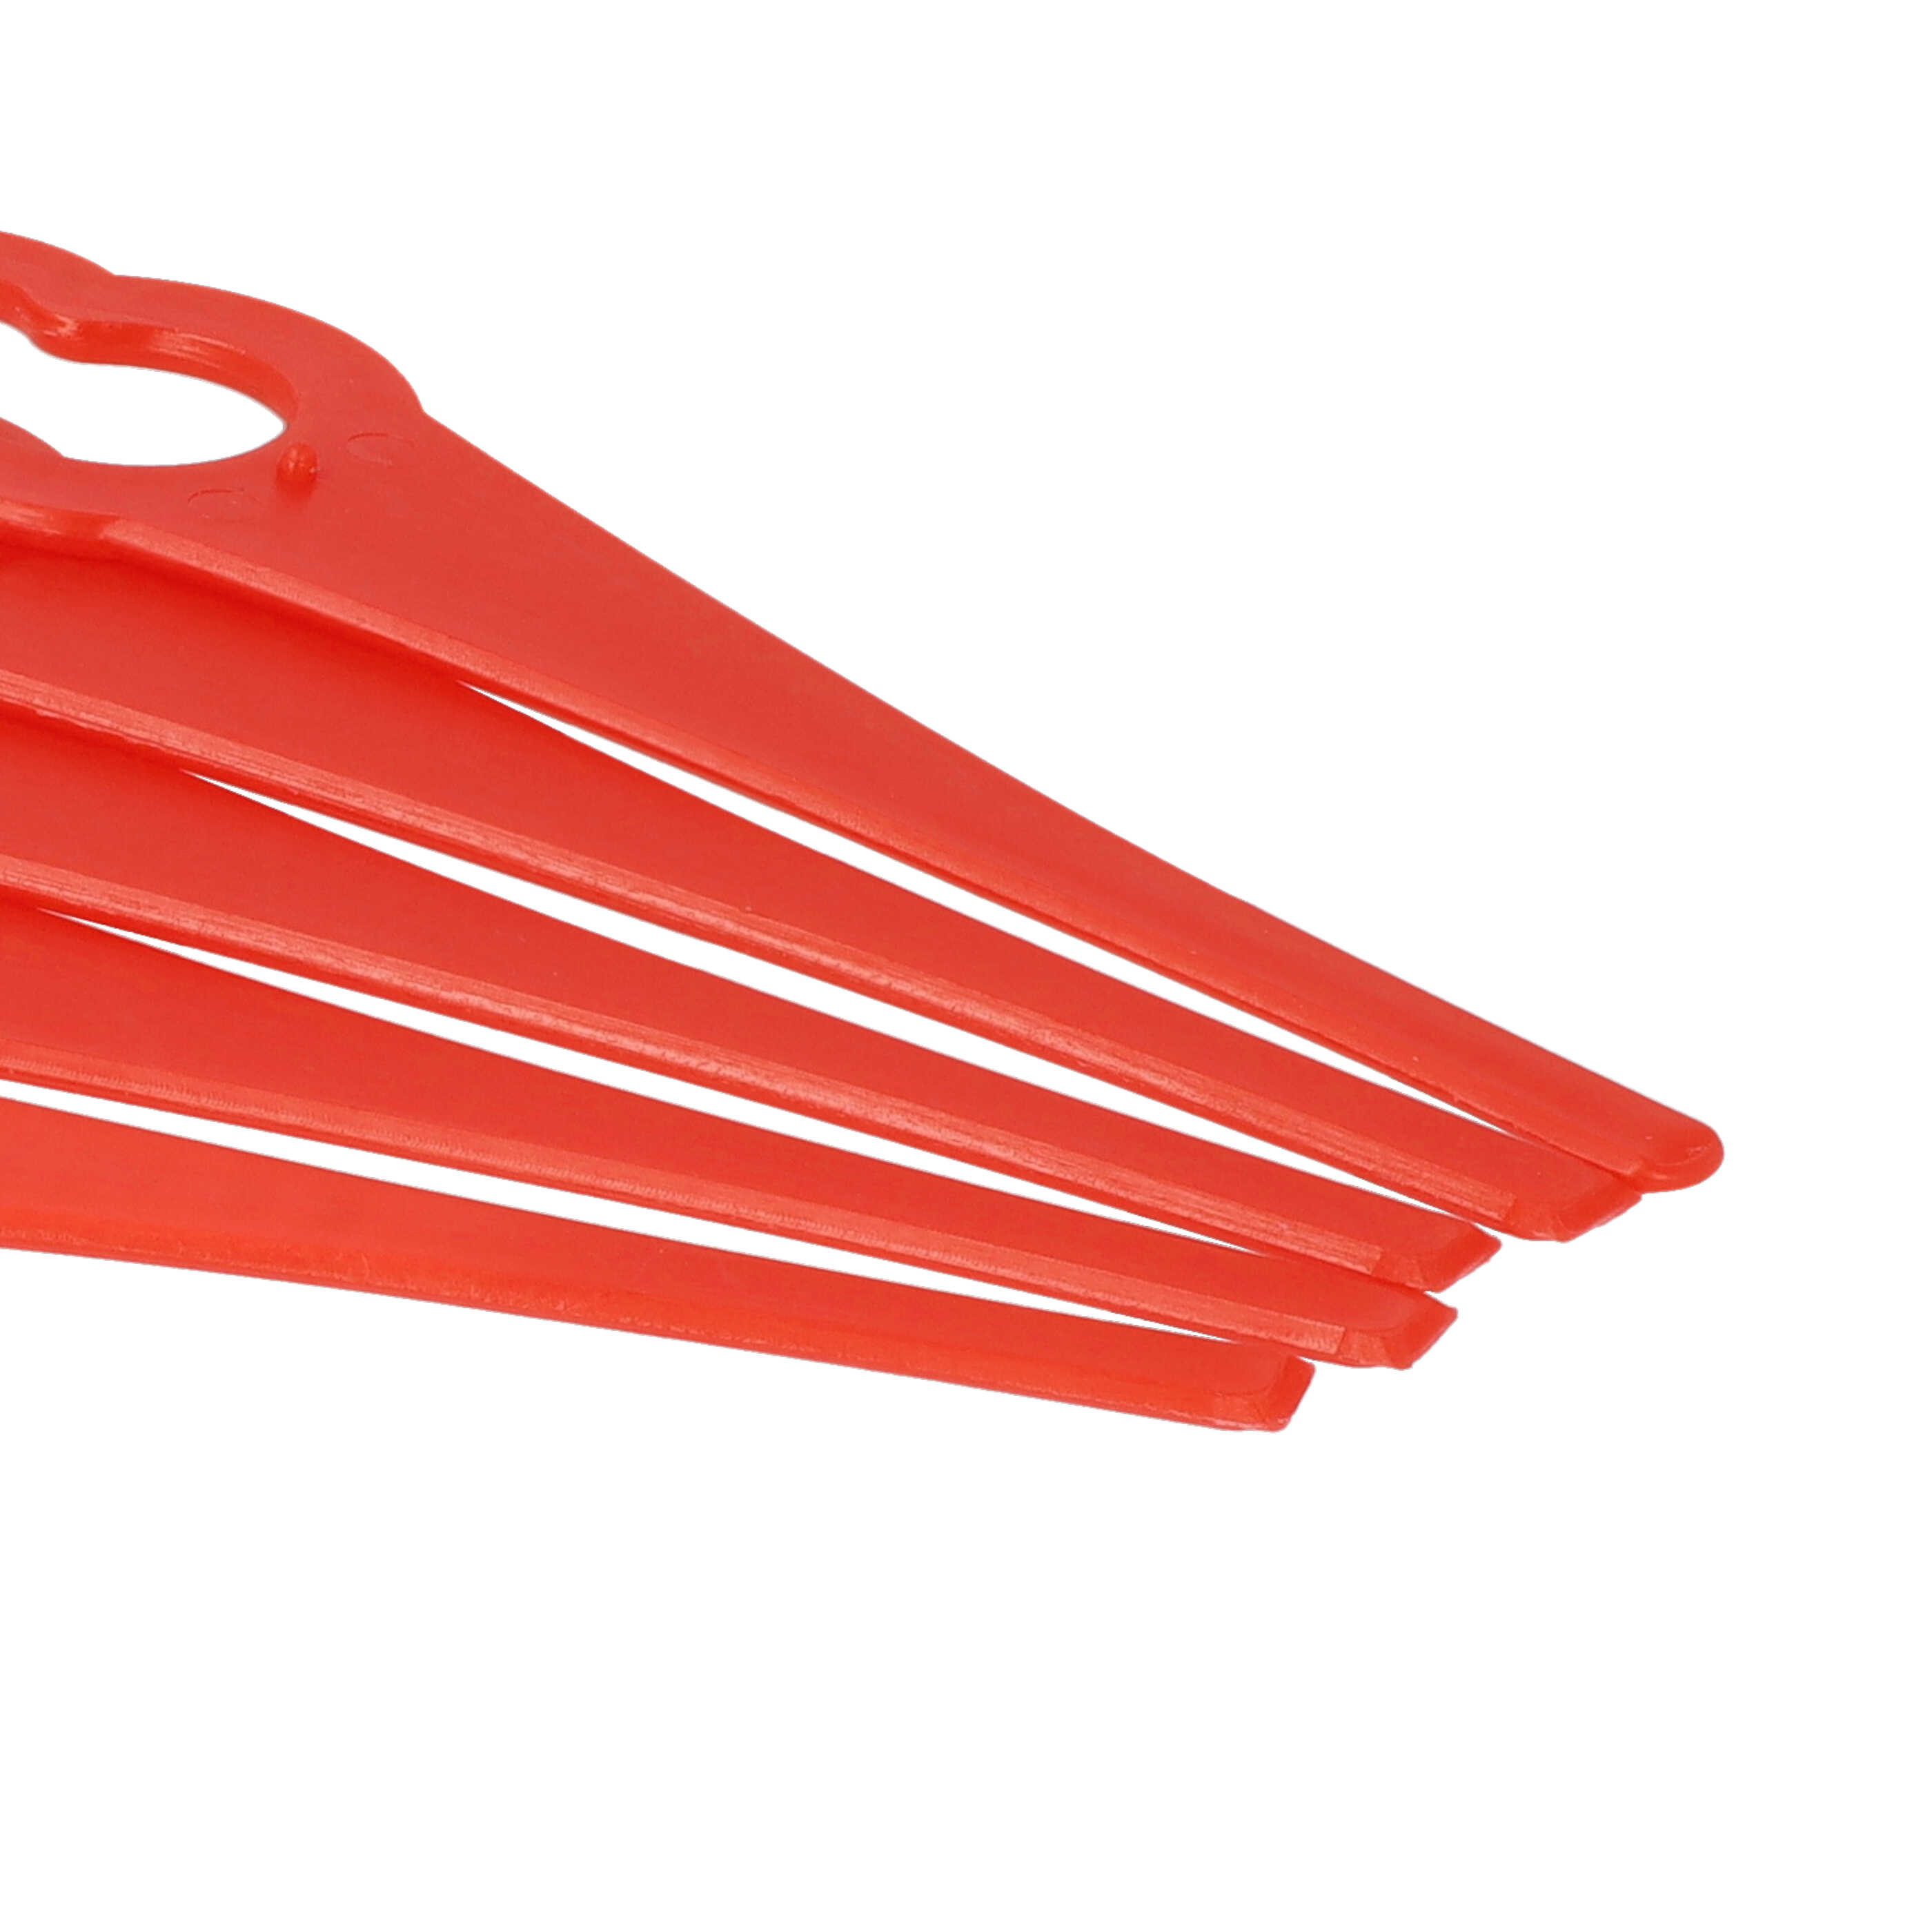 20x Exchange Blade replaces ALM BQ026 for Cordless Strimmer etc. - nylon / plastic, red